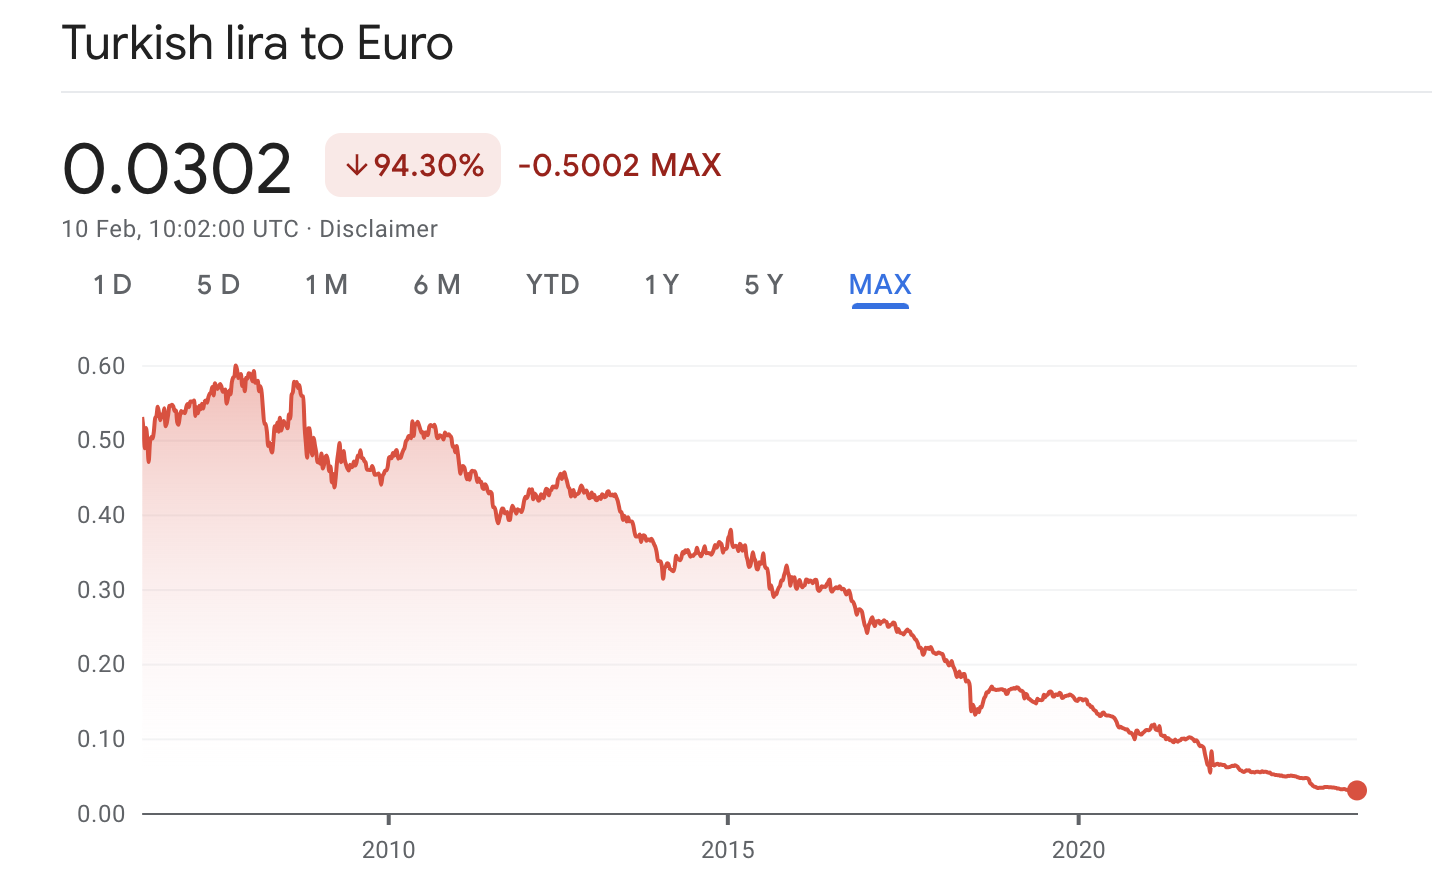 Turkish lira against euro over time